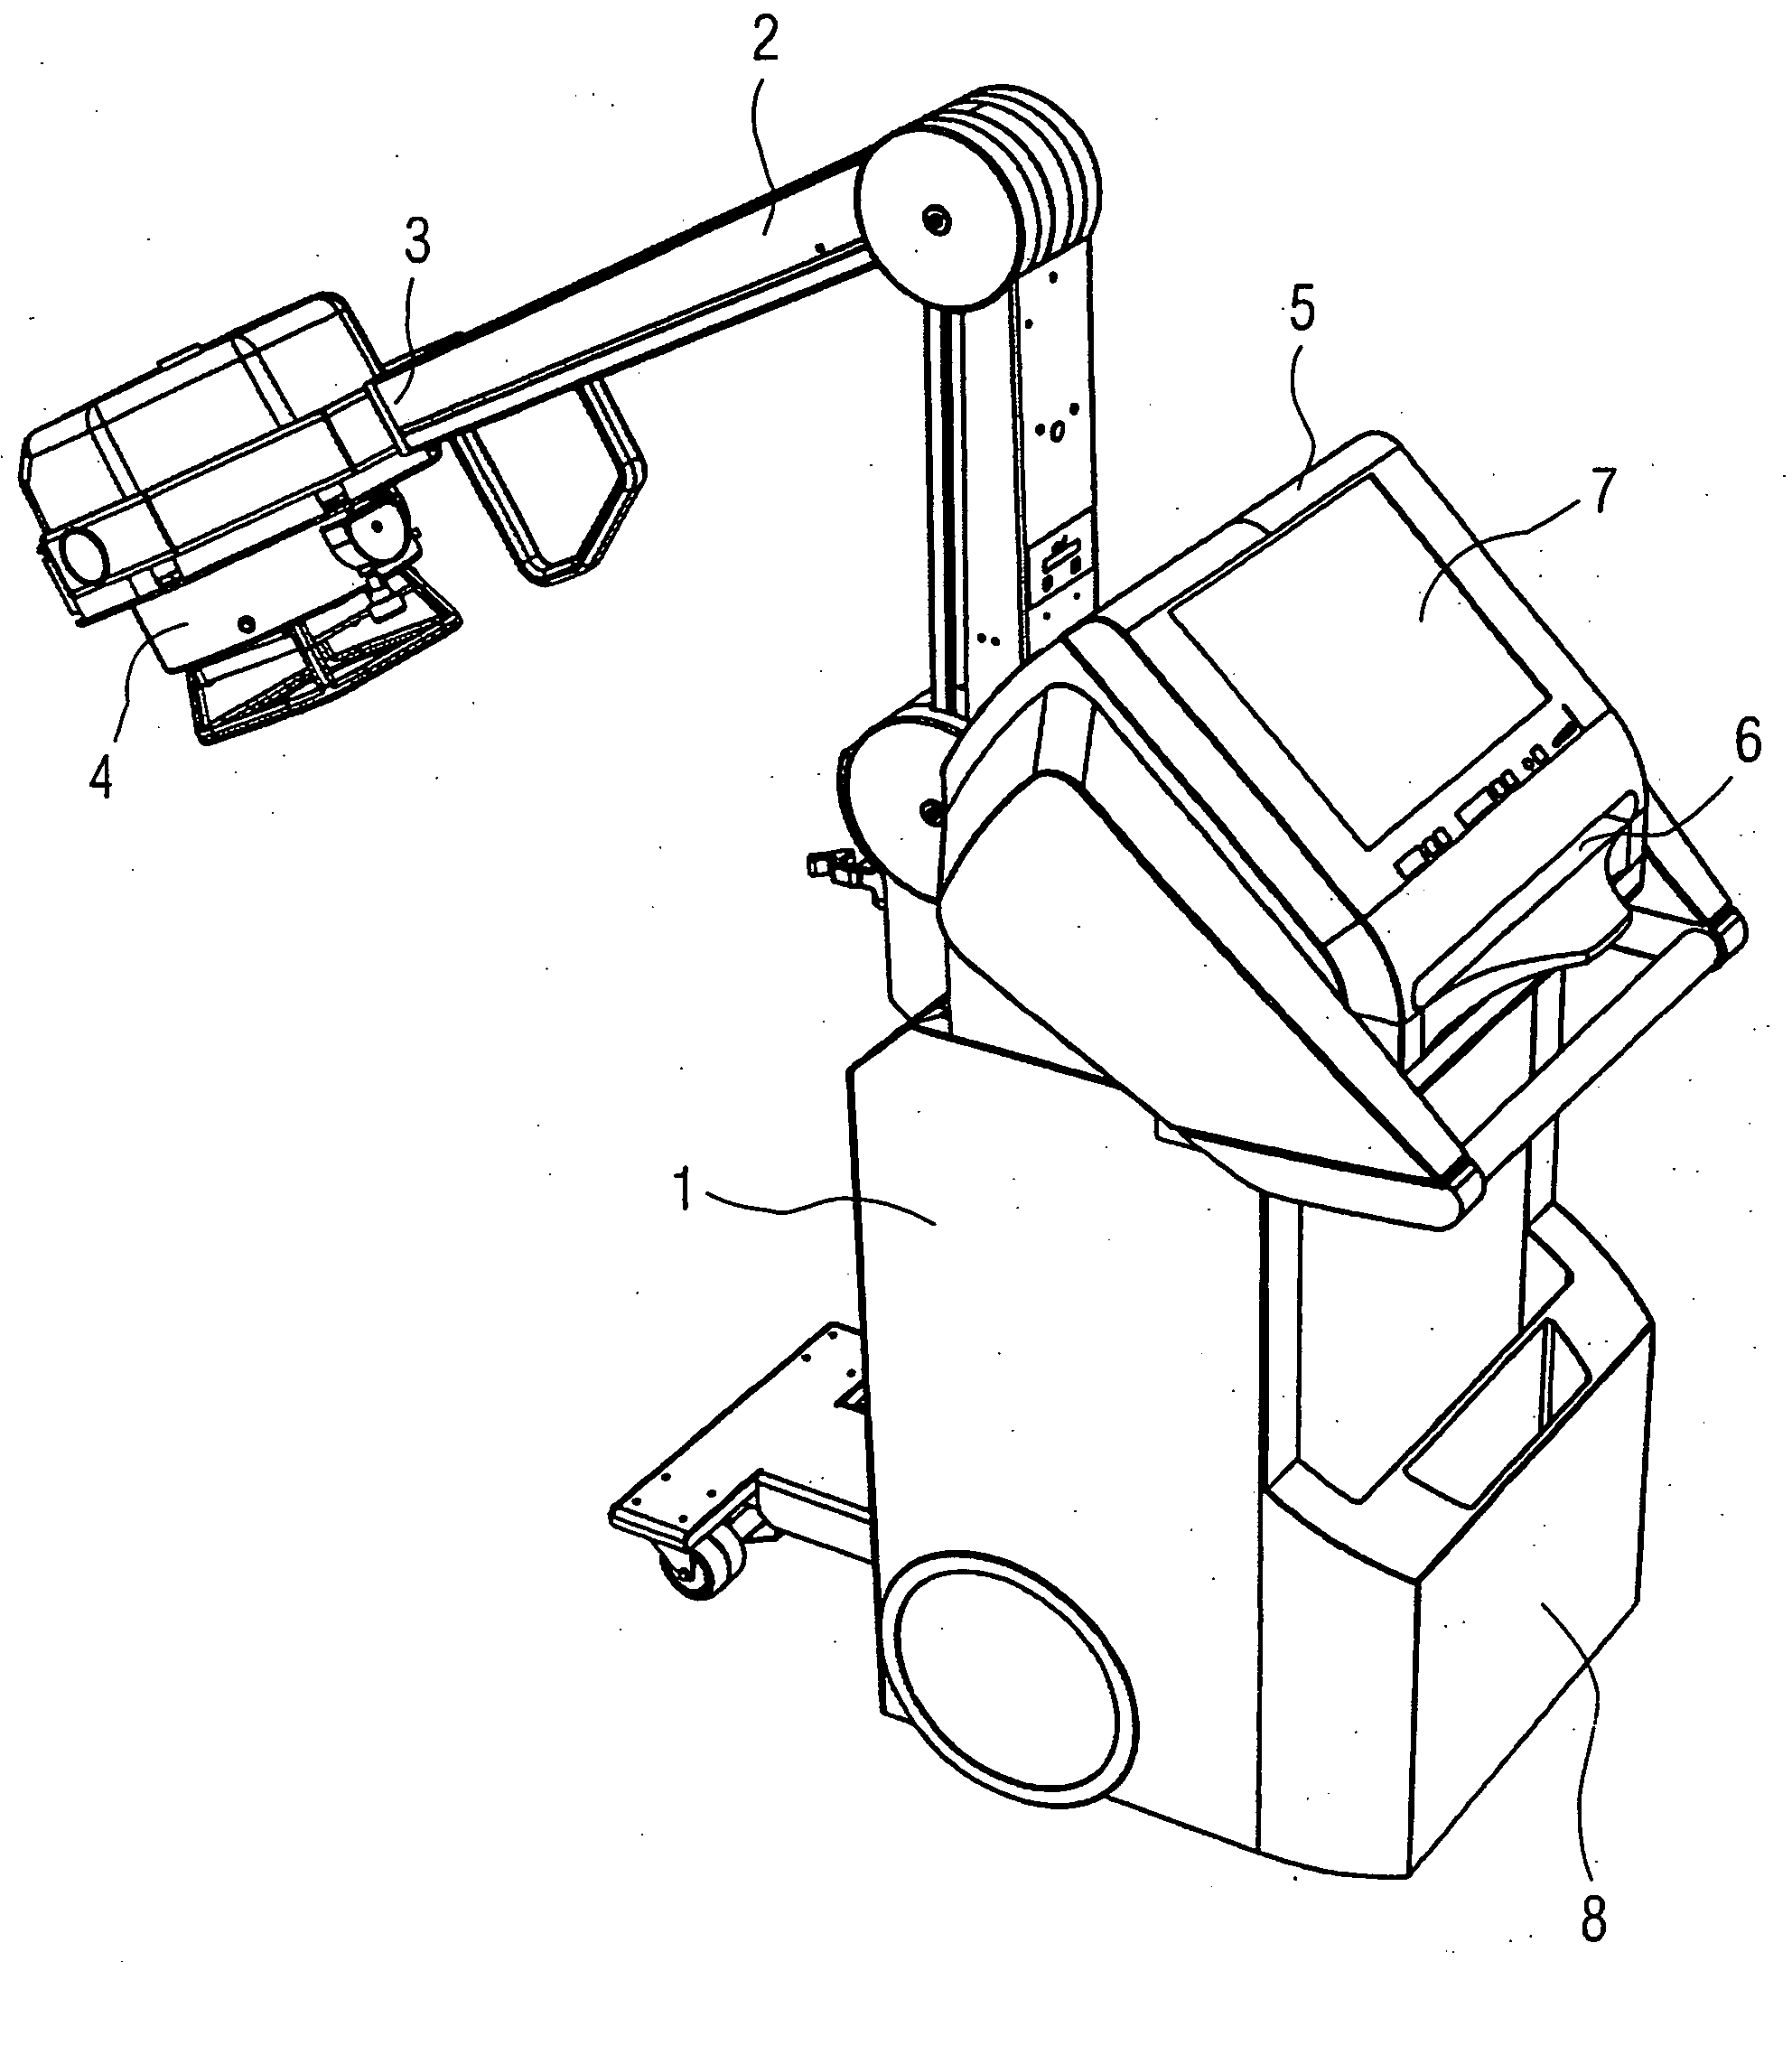 Mobile x-ray acquisition apparatus